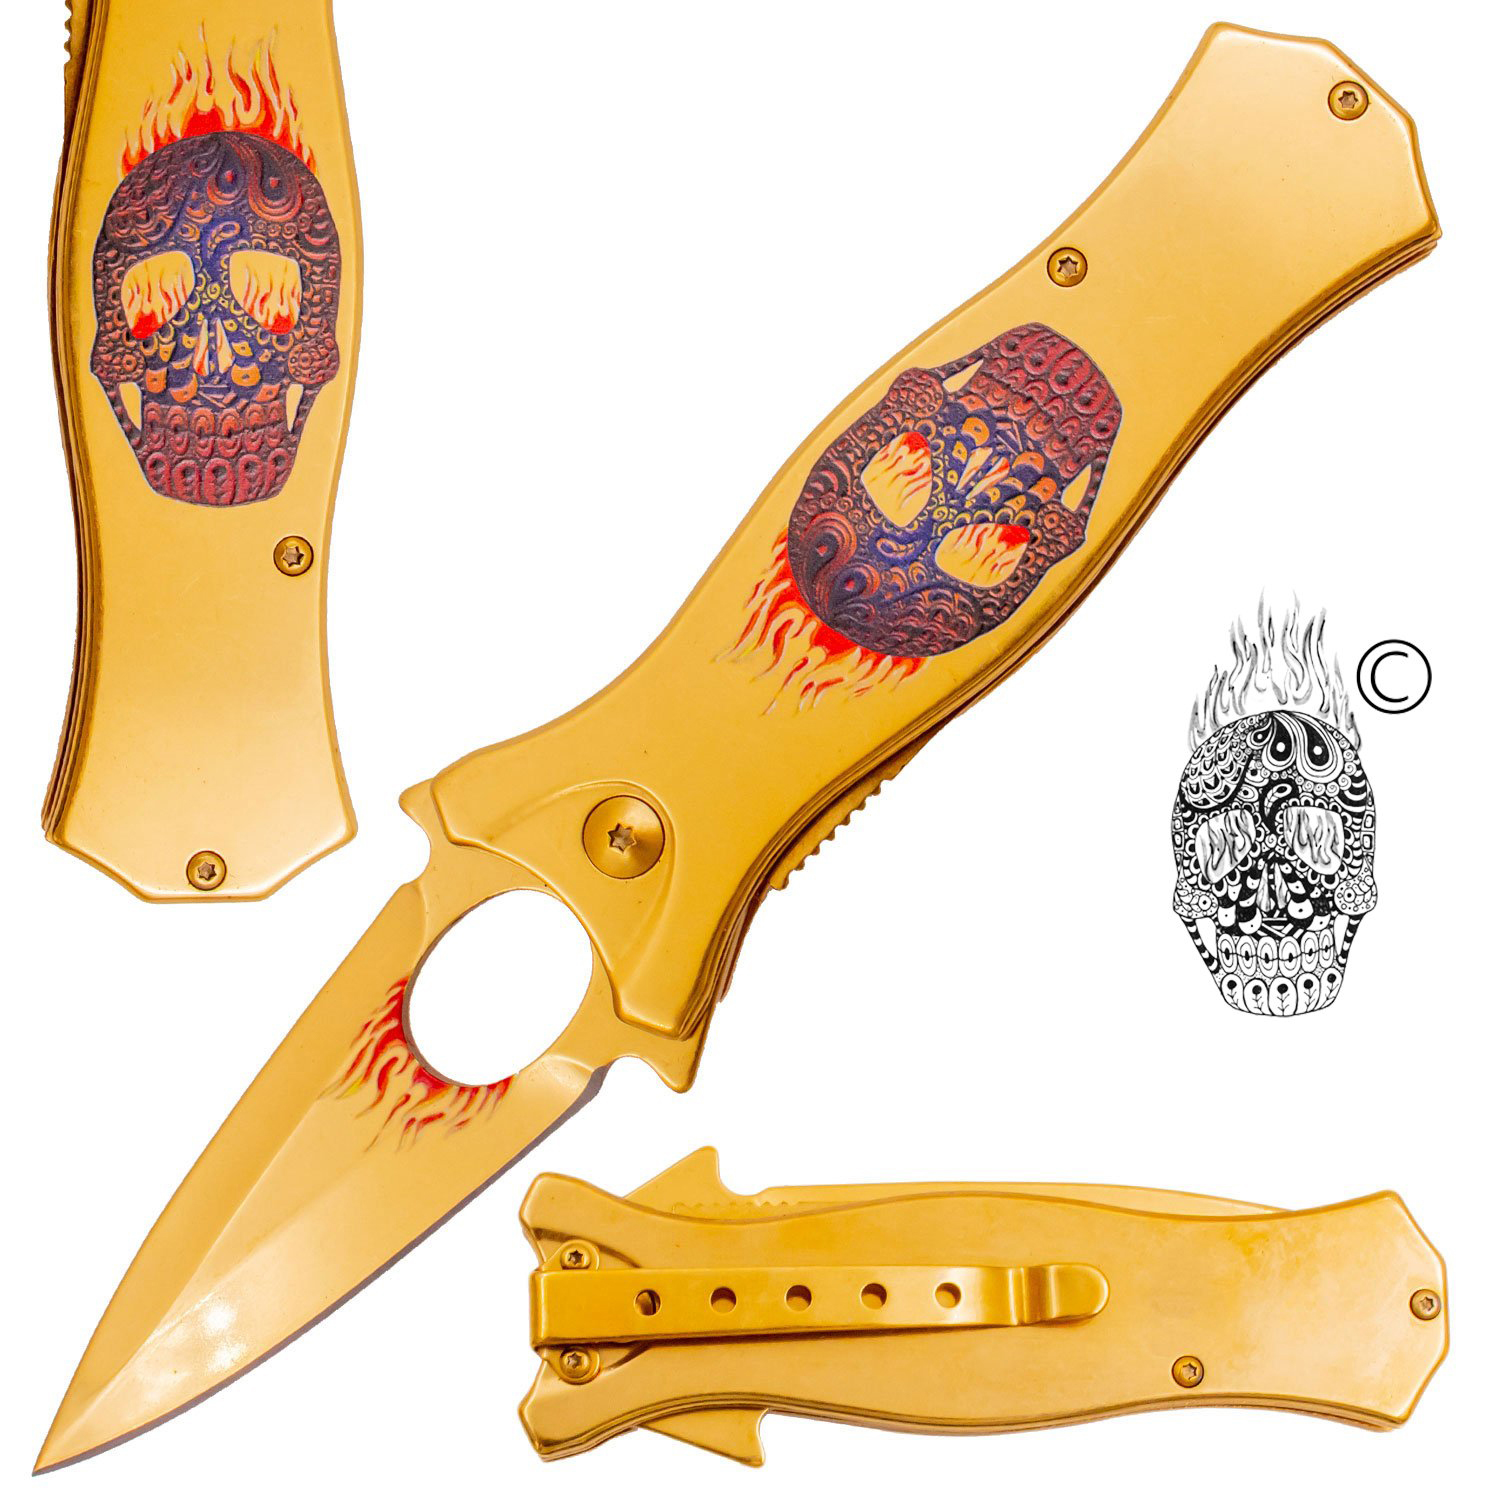 7.5 Inch Golden Ticket Spring Assisted Knife Flaming Sugar Skull (Red and Blue1)